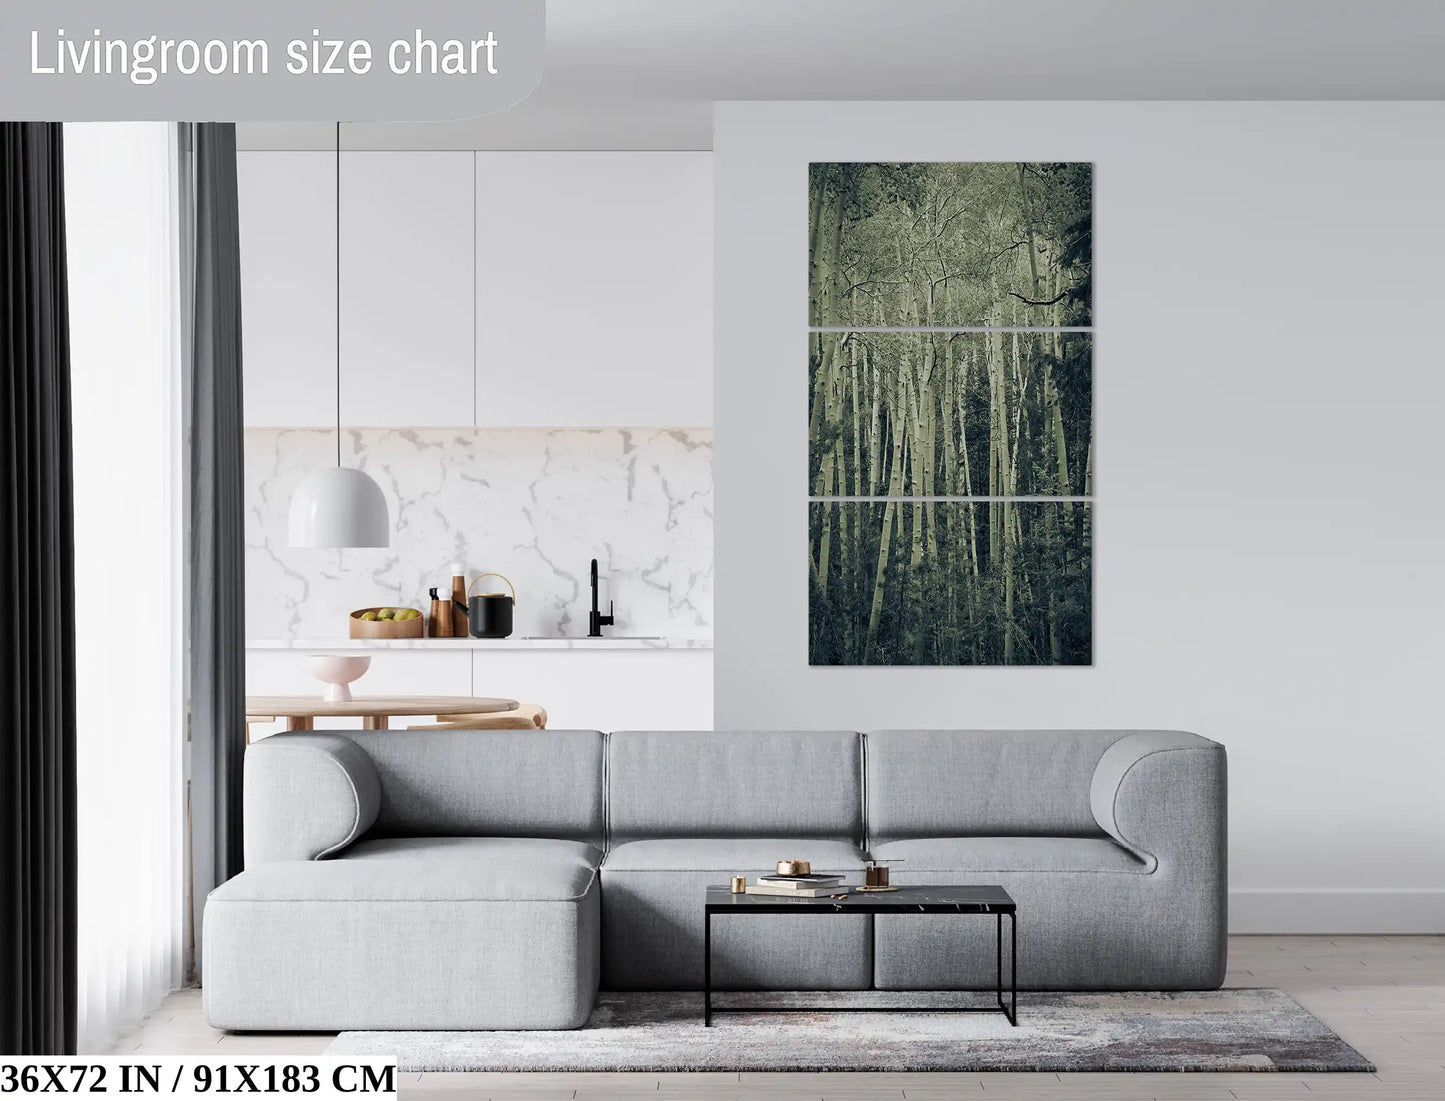 An 3-piece triptych 36x72-inch vertical triptych canvas print in a living room, the duotone aspen birch trees giving the space a mystical forest feel.